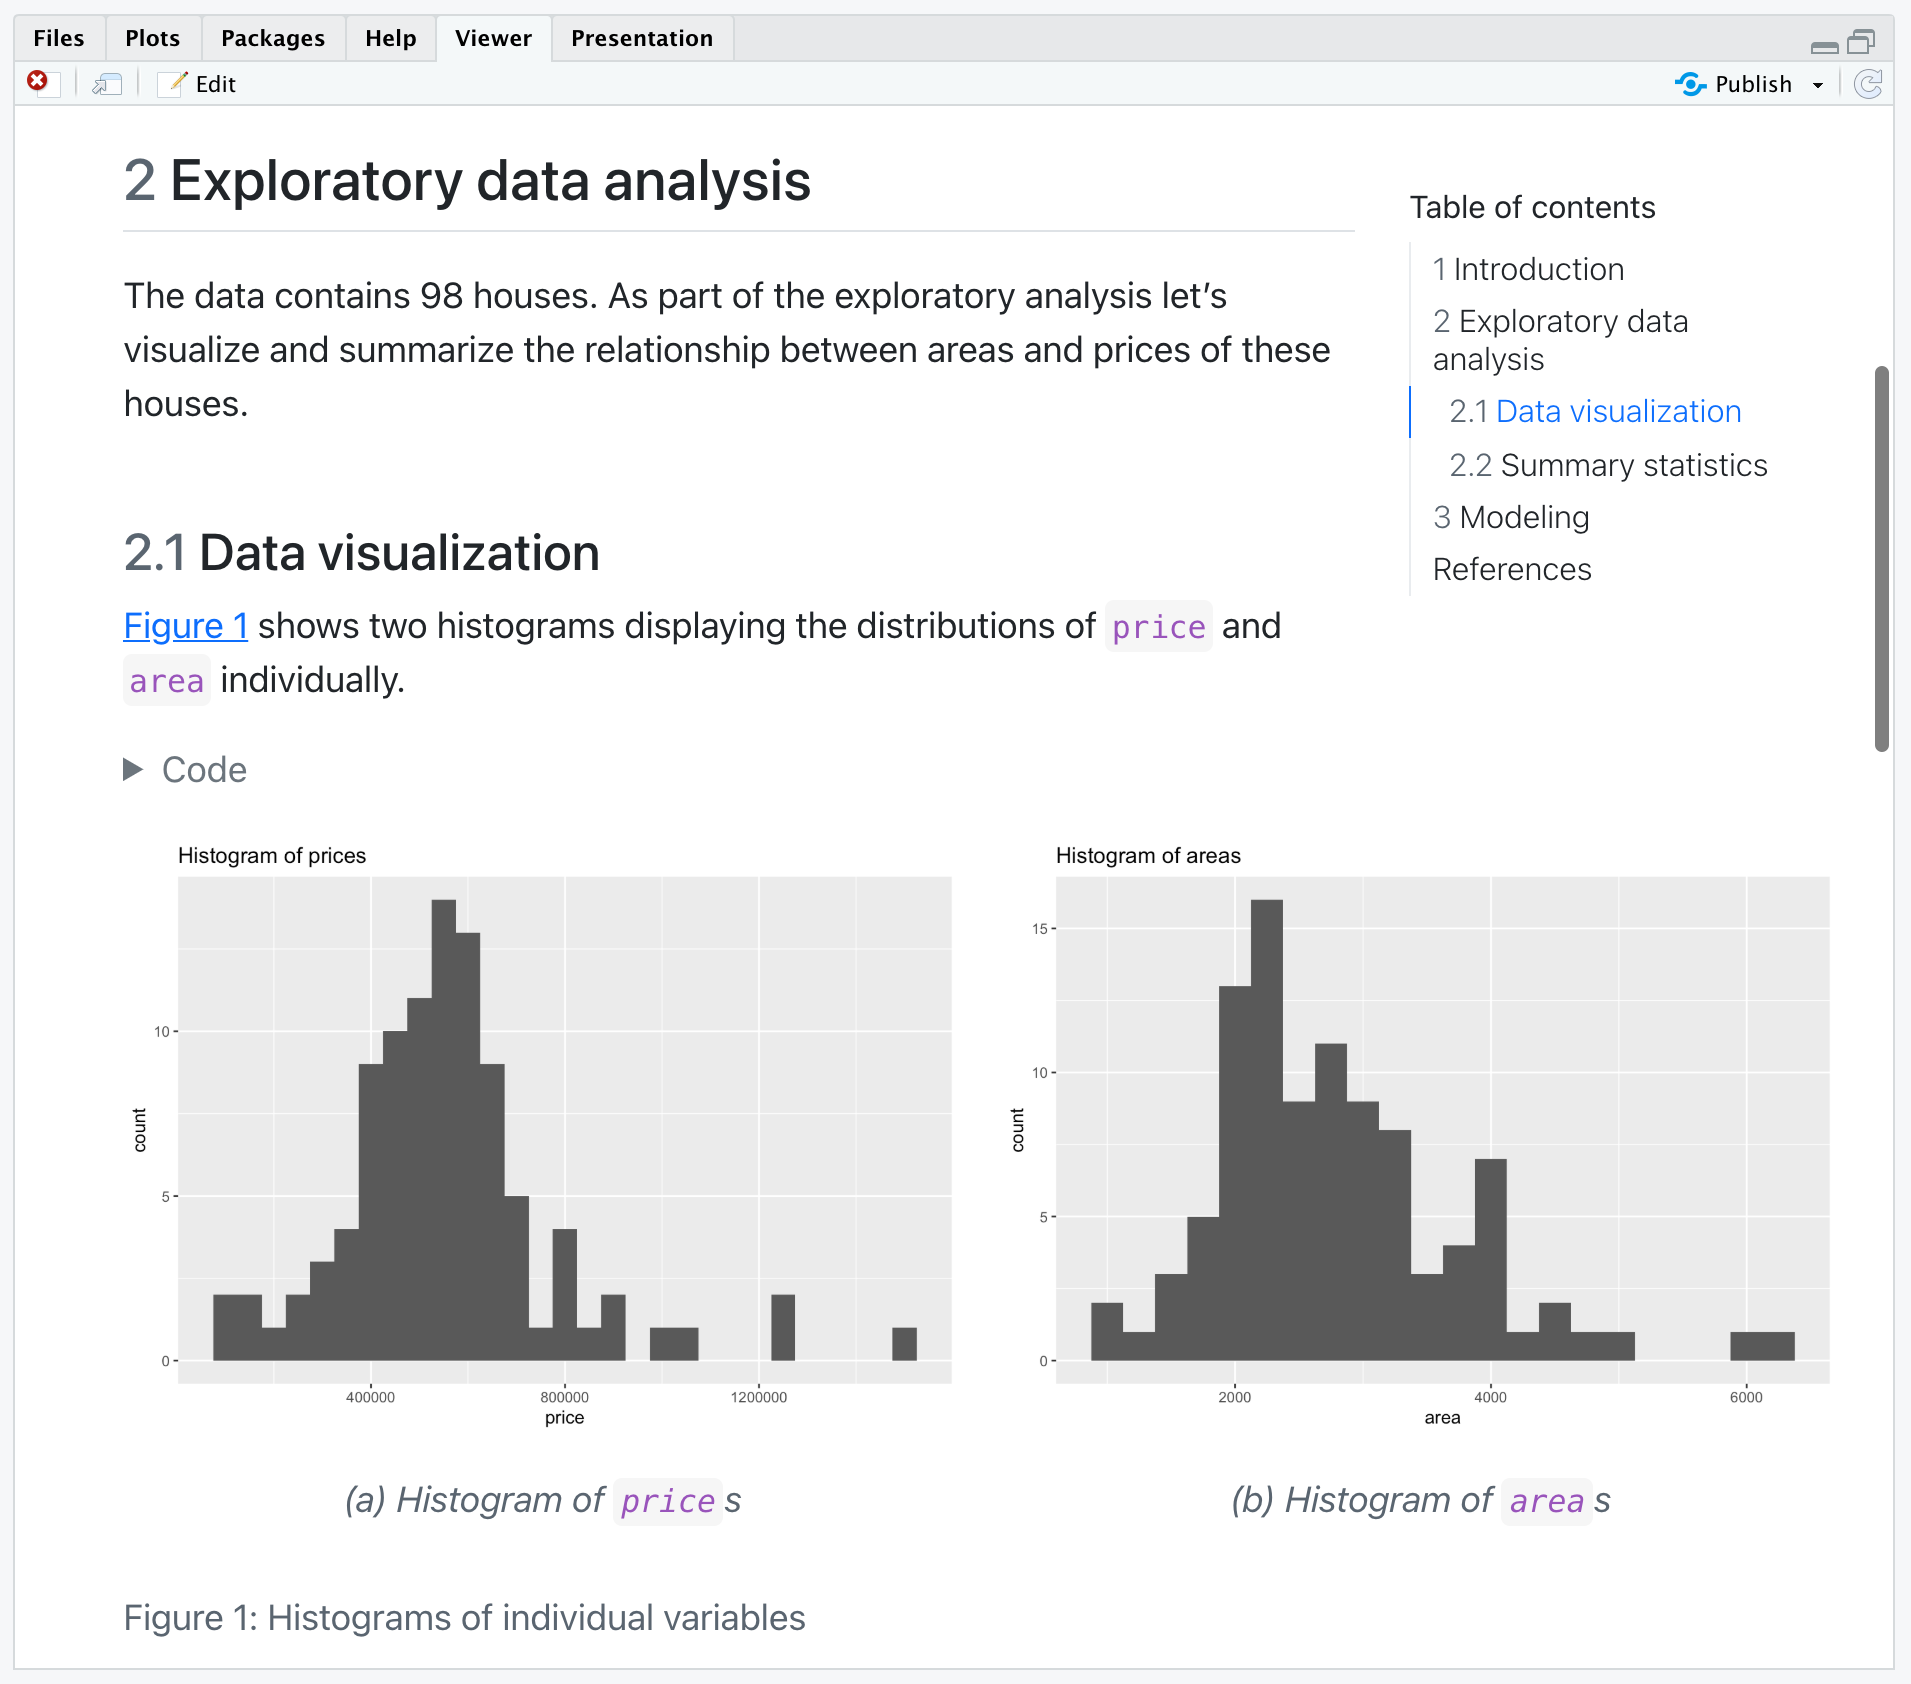 Rendered version of authoring.qmd as HTML. Exploratory data analysis section is shown, the side-by-side histograms span a width wider than the rest of the document.